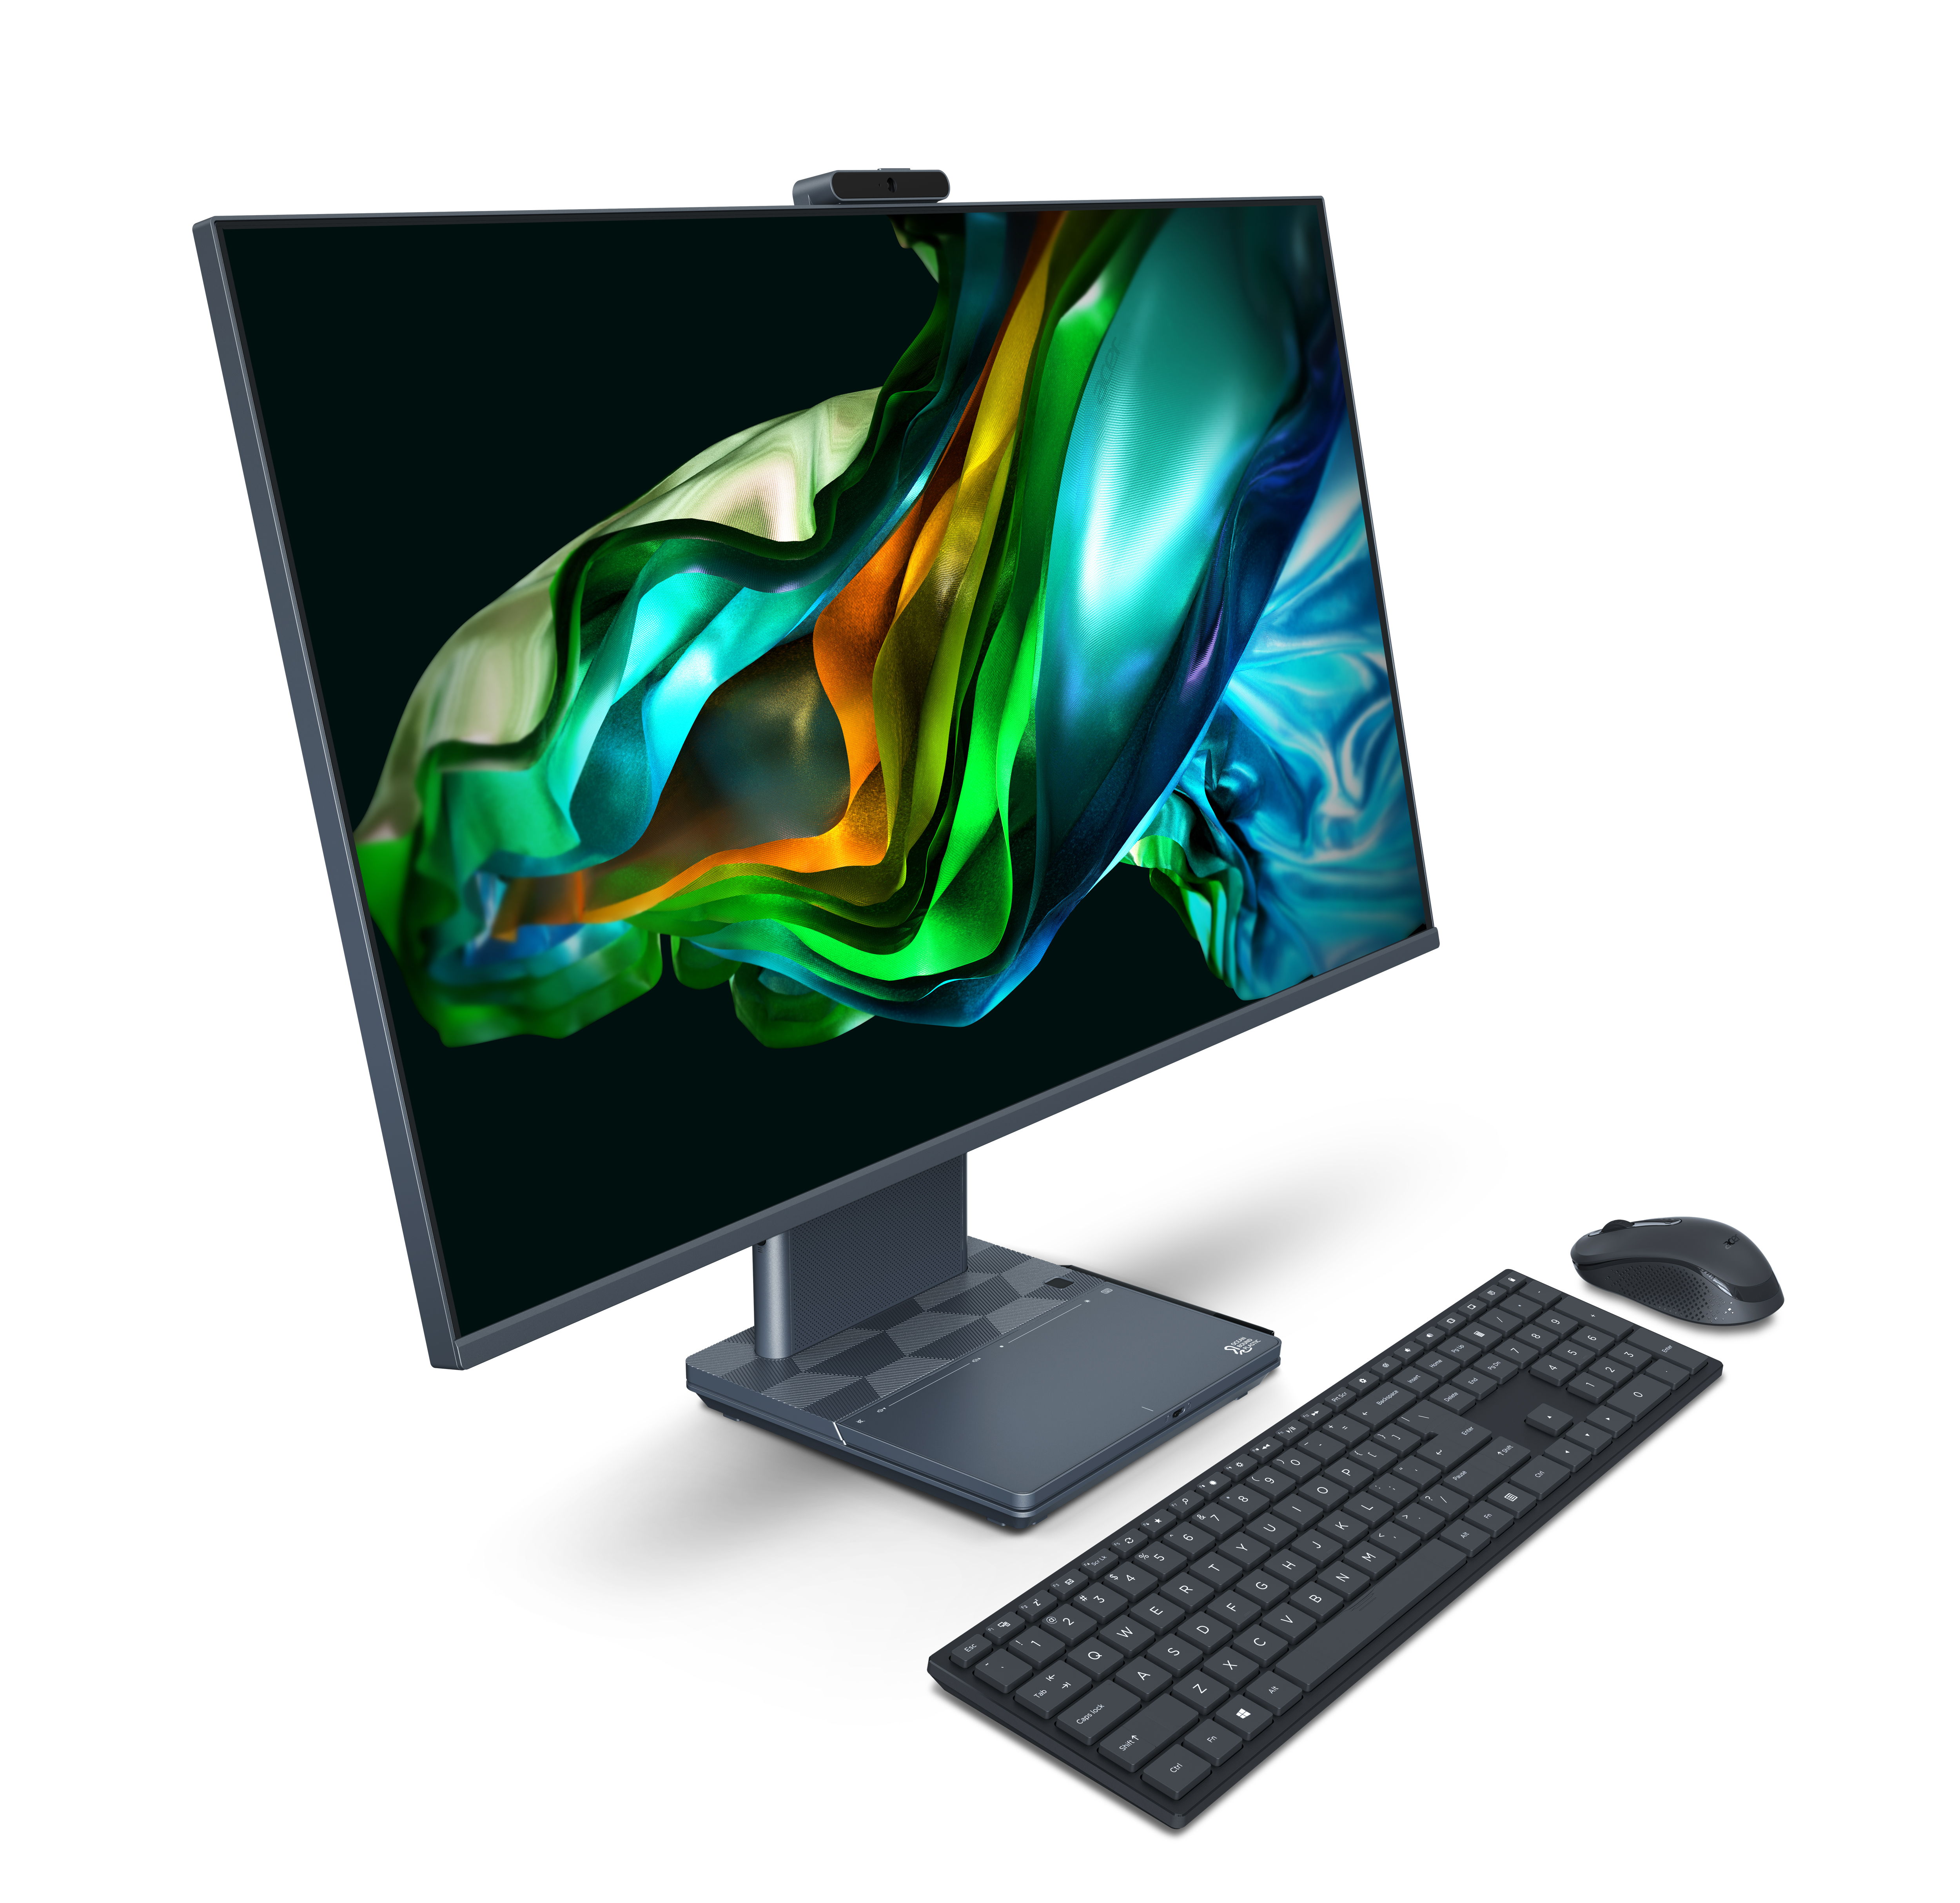 Acer Aspire S Series All-in-One PC